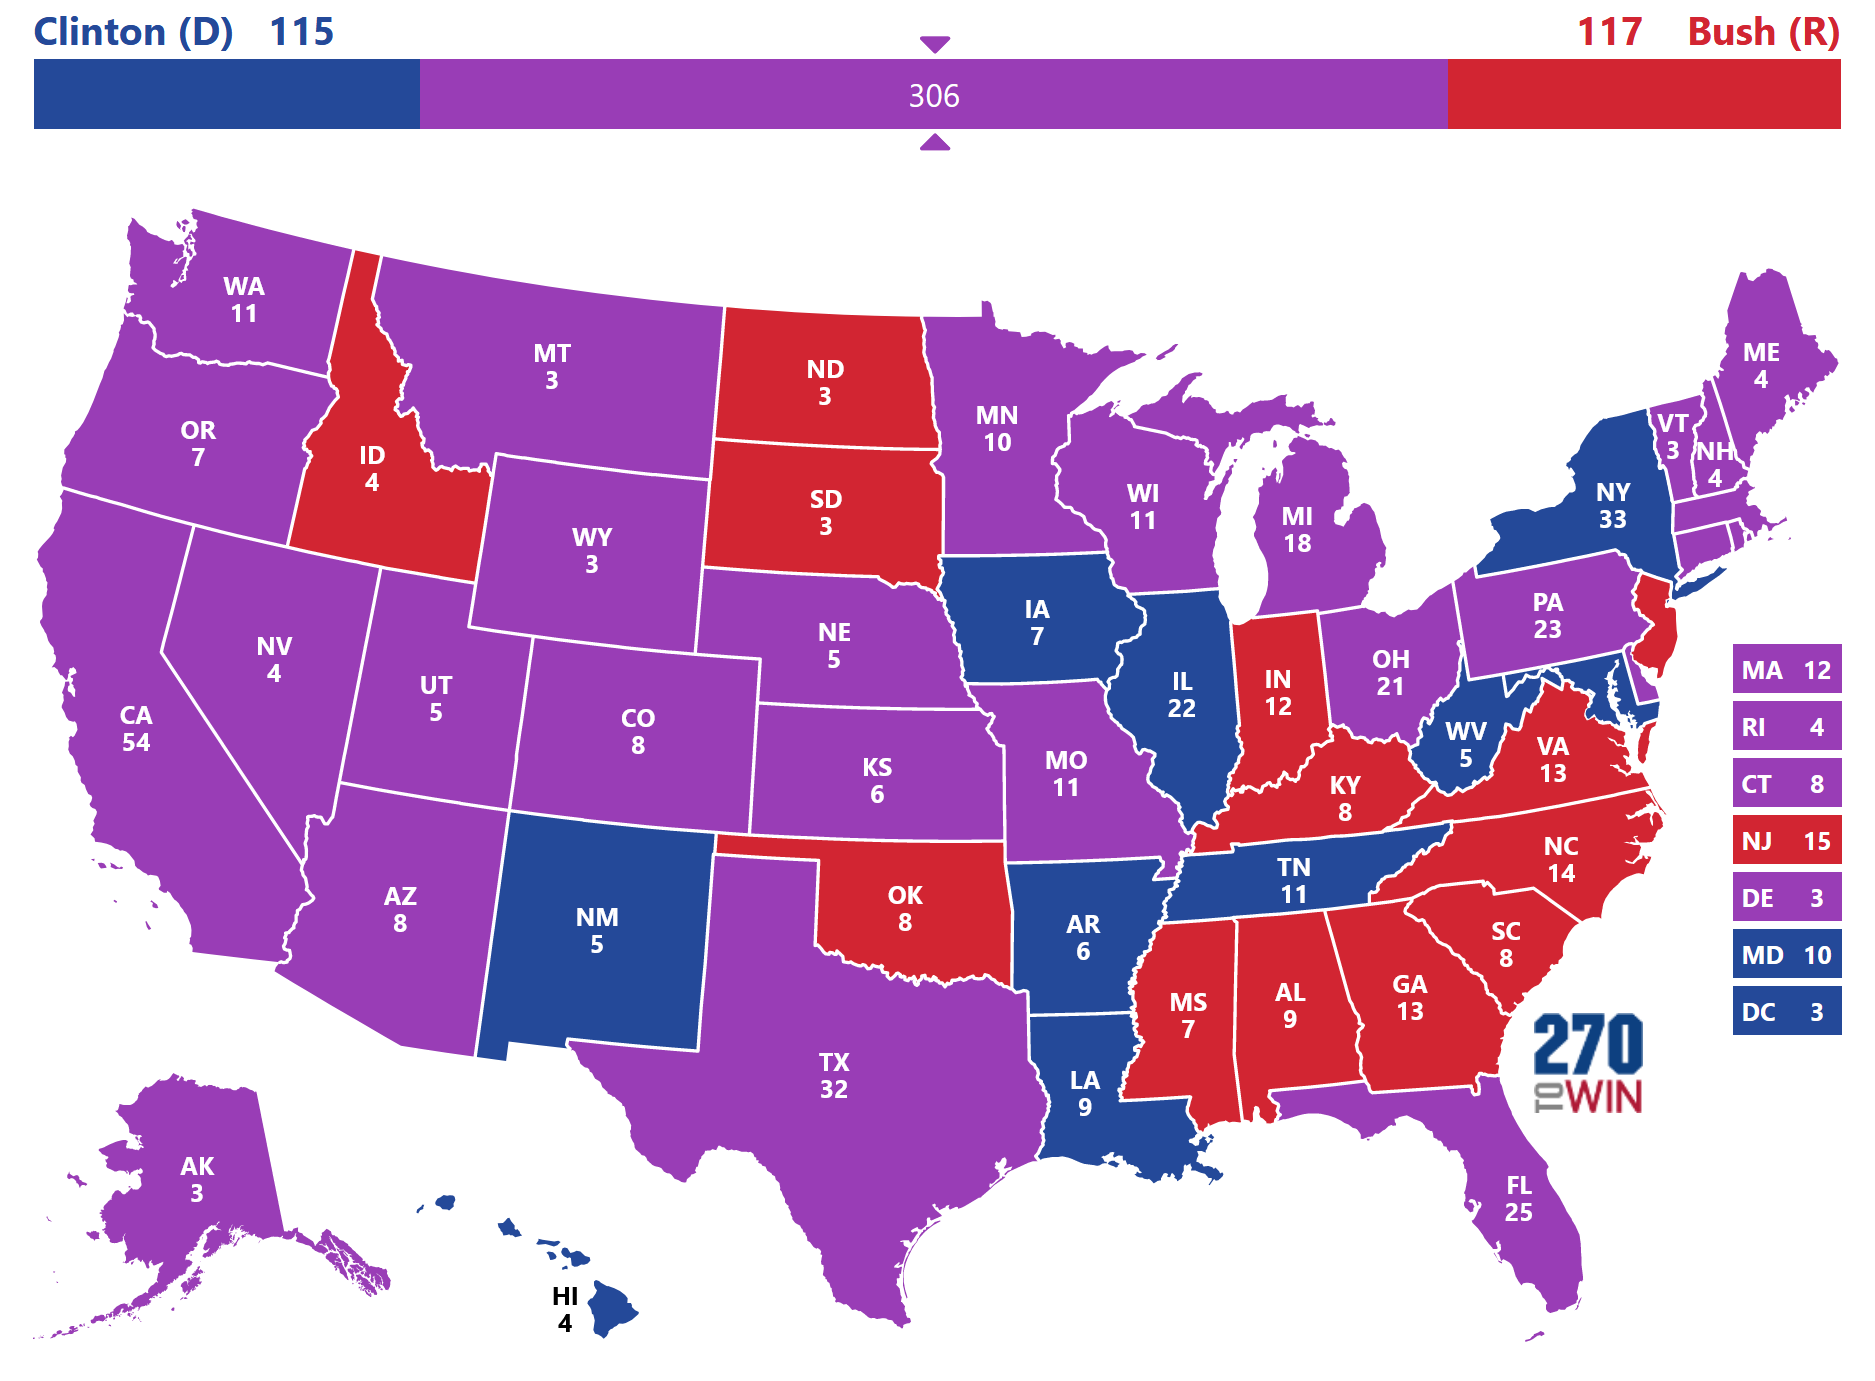 Electoral College map showing a Perot win with 306 EVs